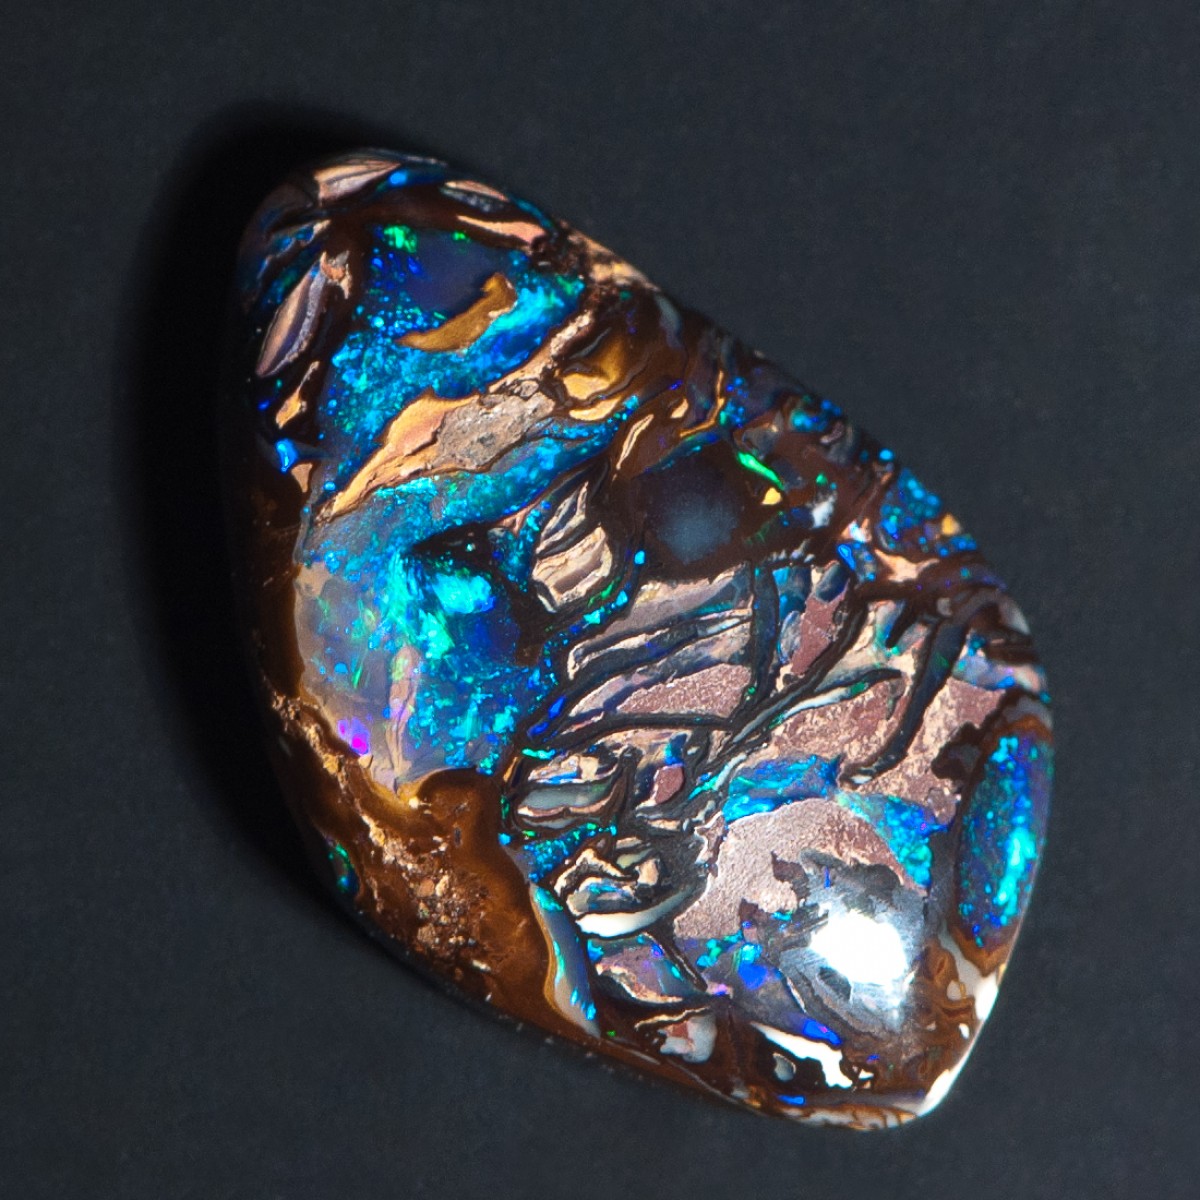 Types Of Opal With Pictures | vlr.eng.br